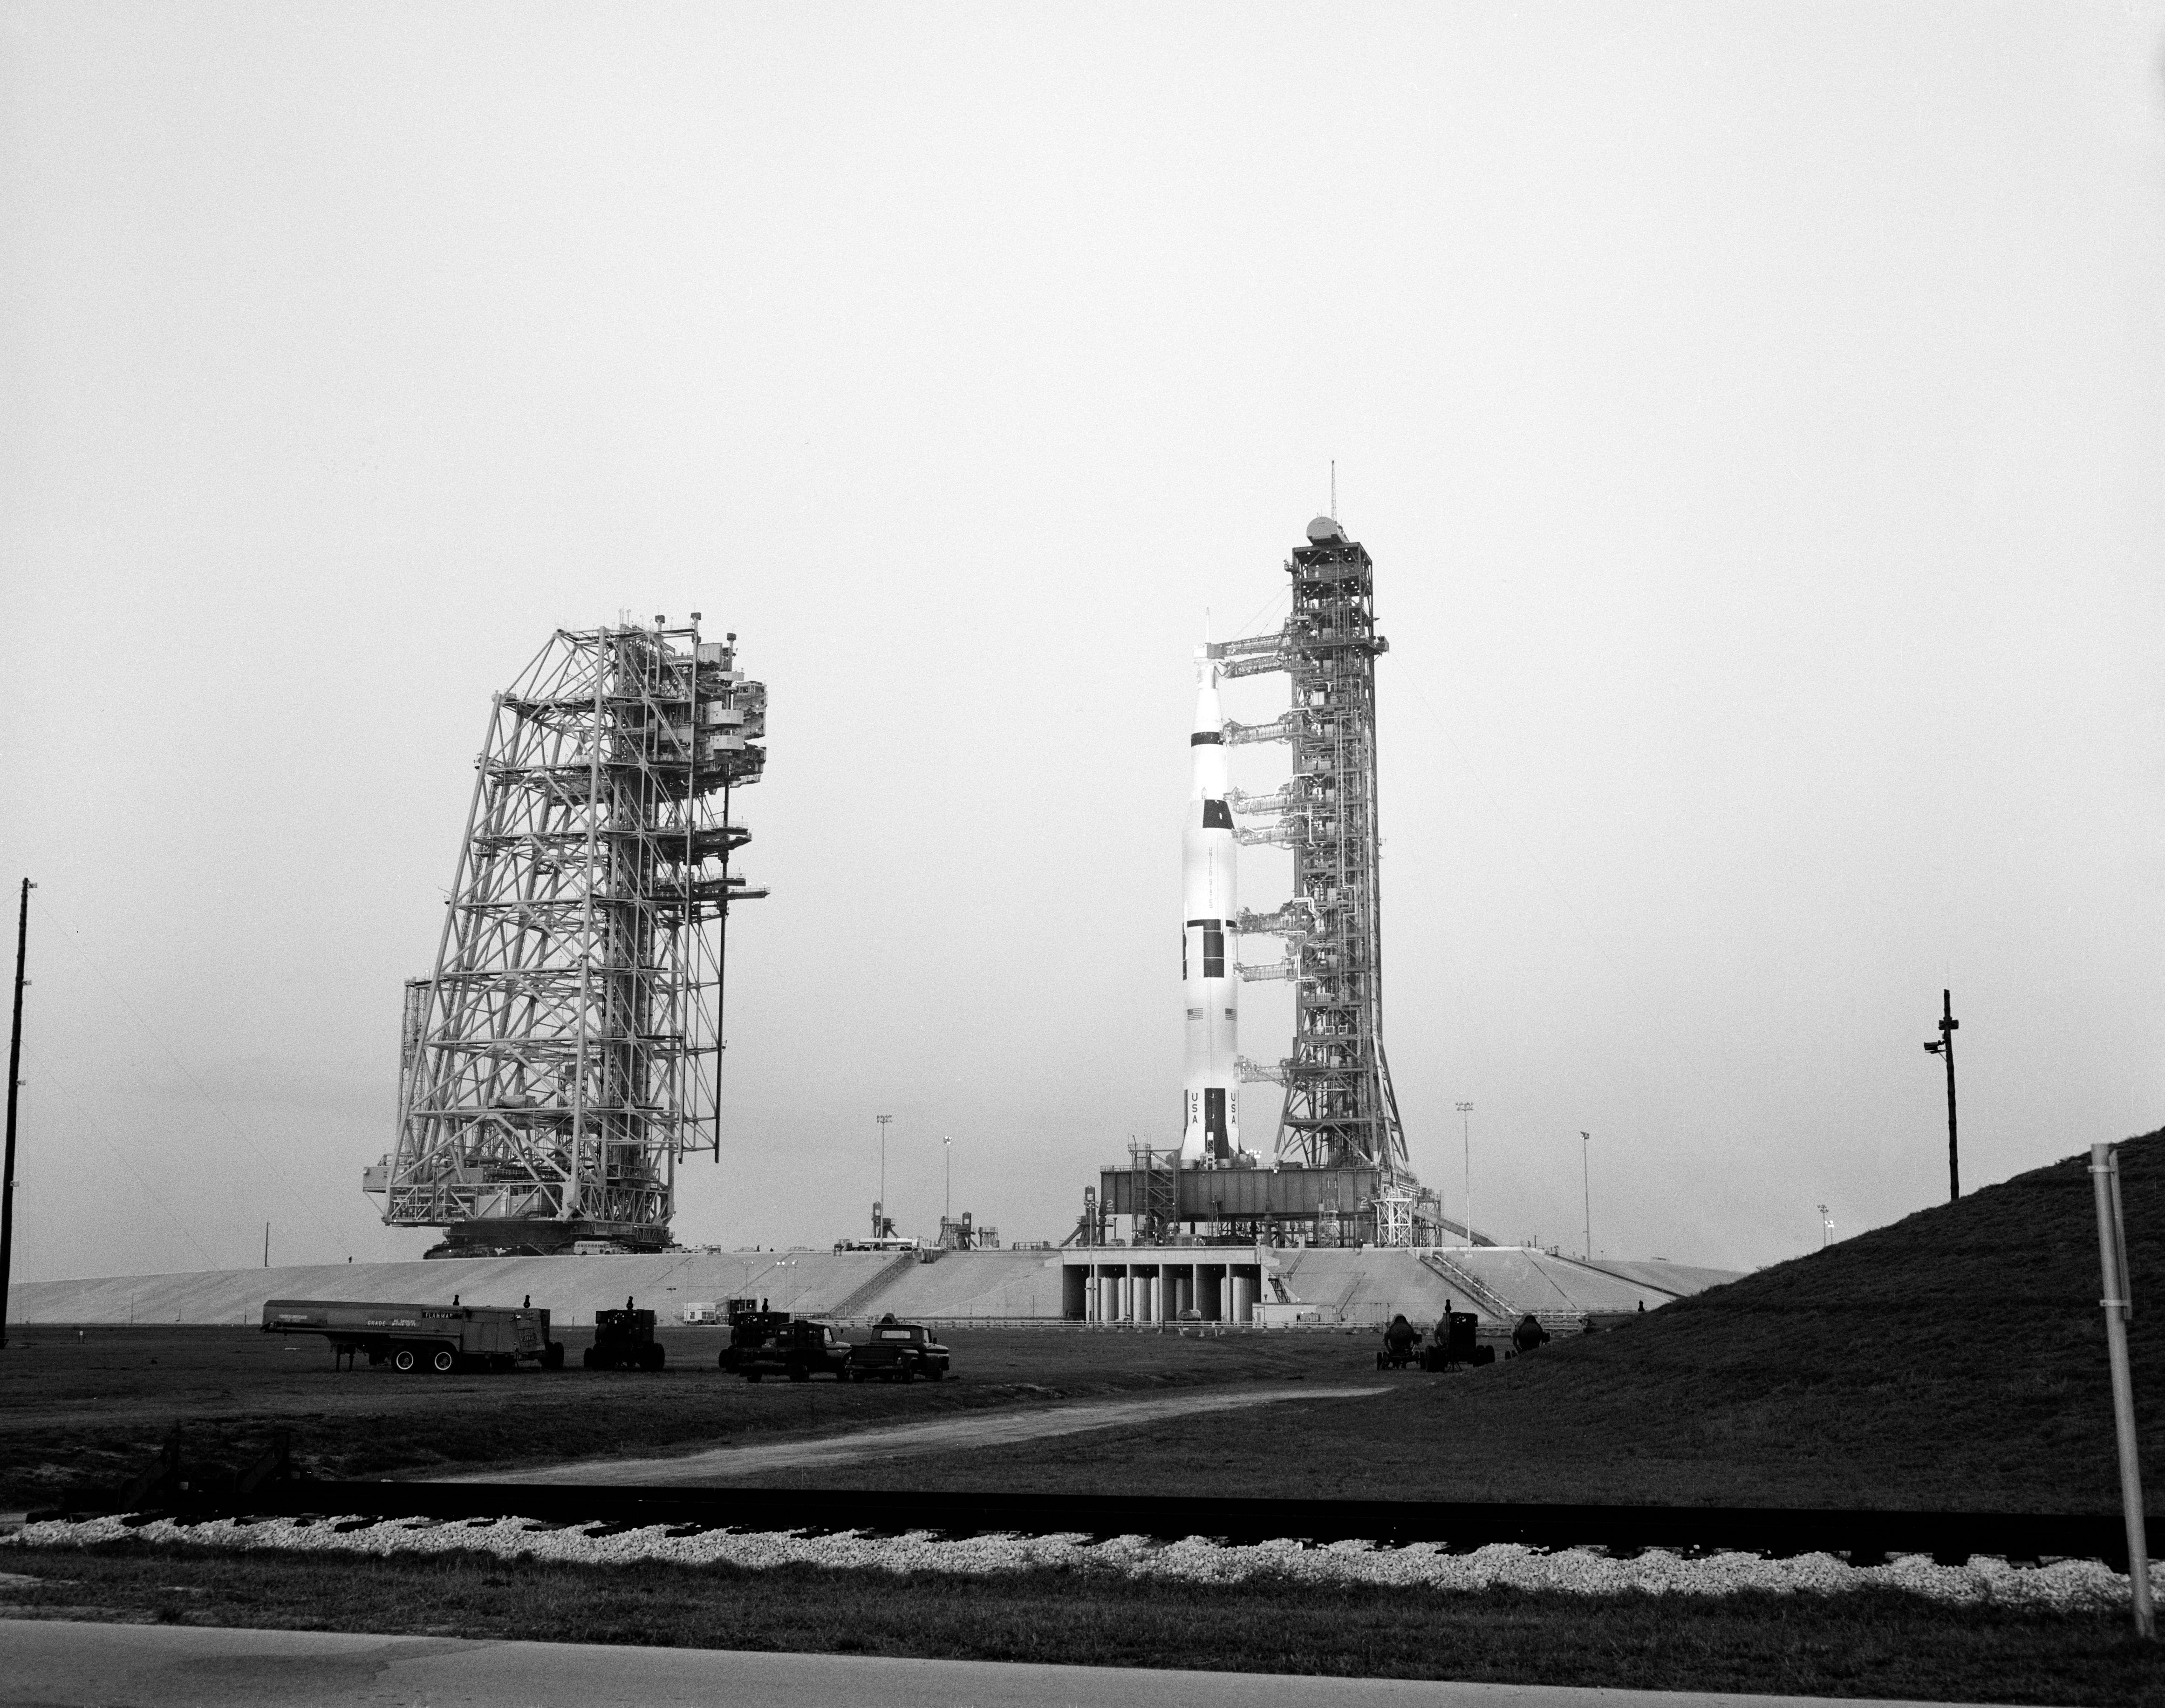 The Apollo 9 Saturn V at Launch Pad 39A at NASA's Kennedy Space Center in Florida during the Countdown Demonstration Test (CDDT)